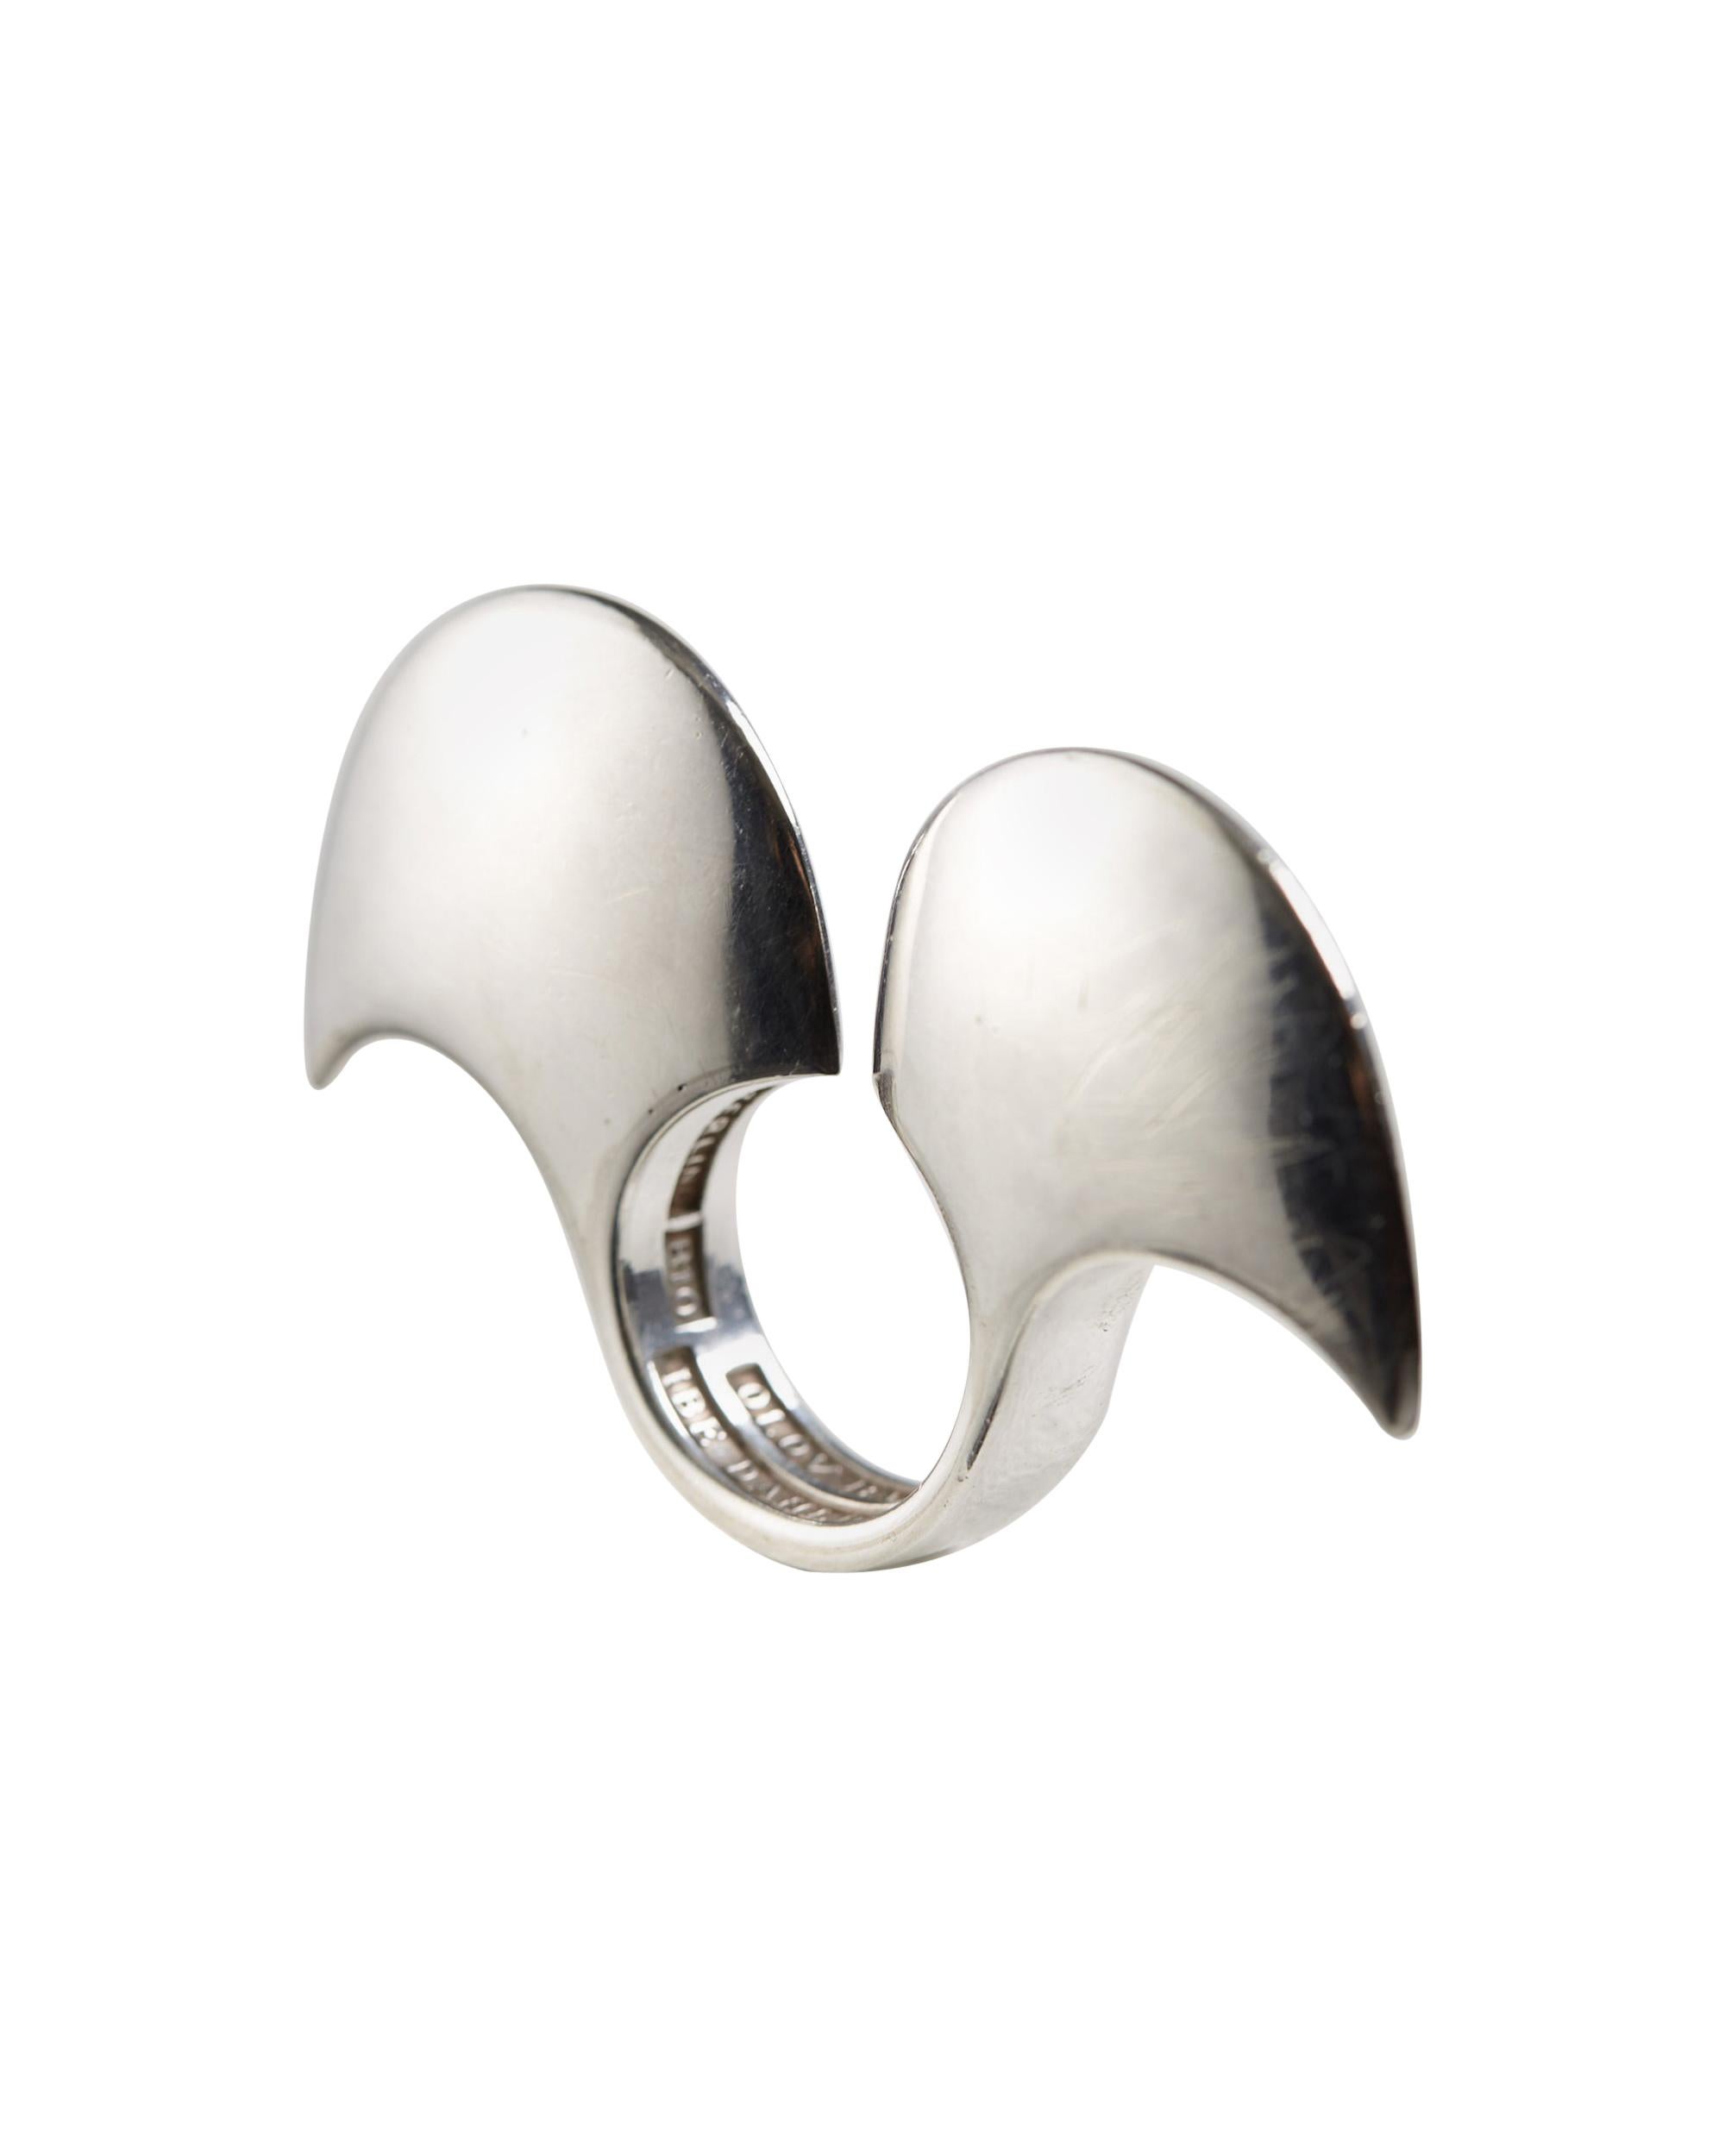 Ring Designed by Ibe Dahlquist and Olov Barve, Sweden, 1977 For Sale